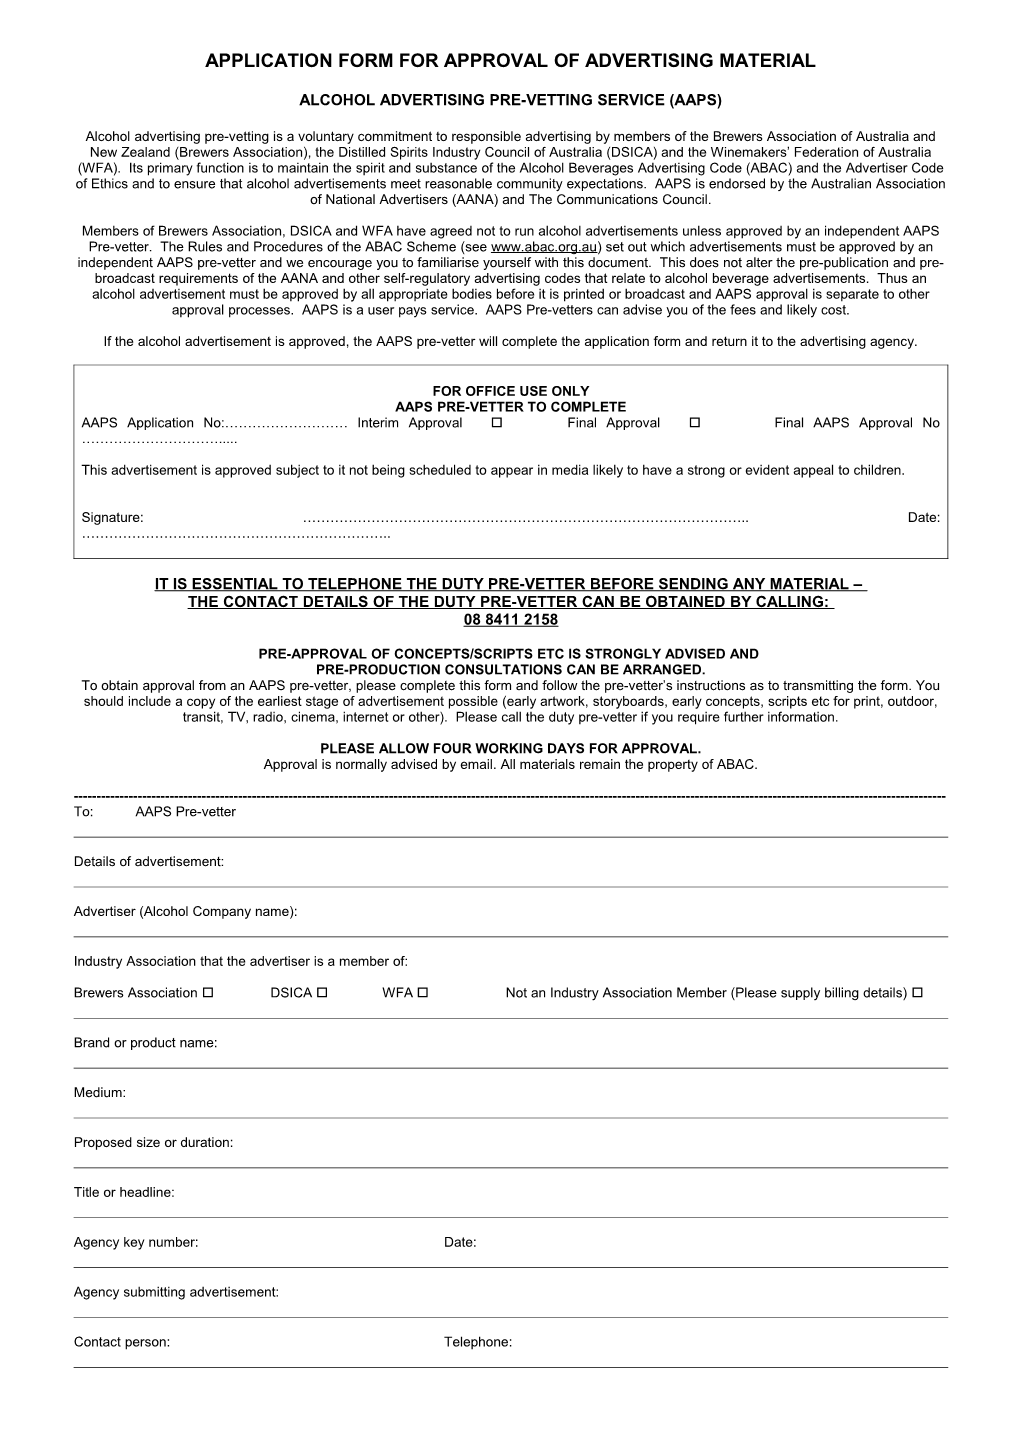 Application Form for Approval of Advertising Material